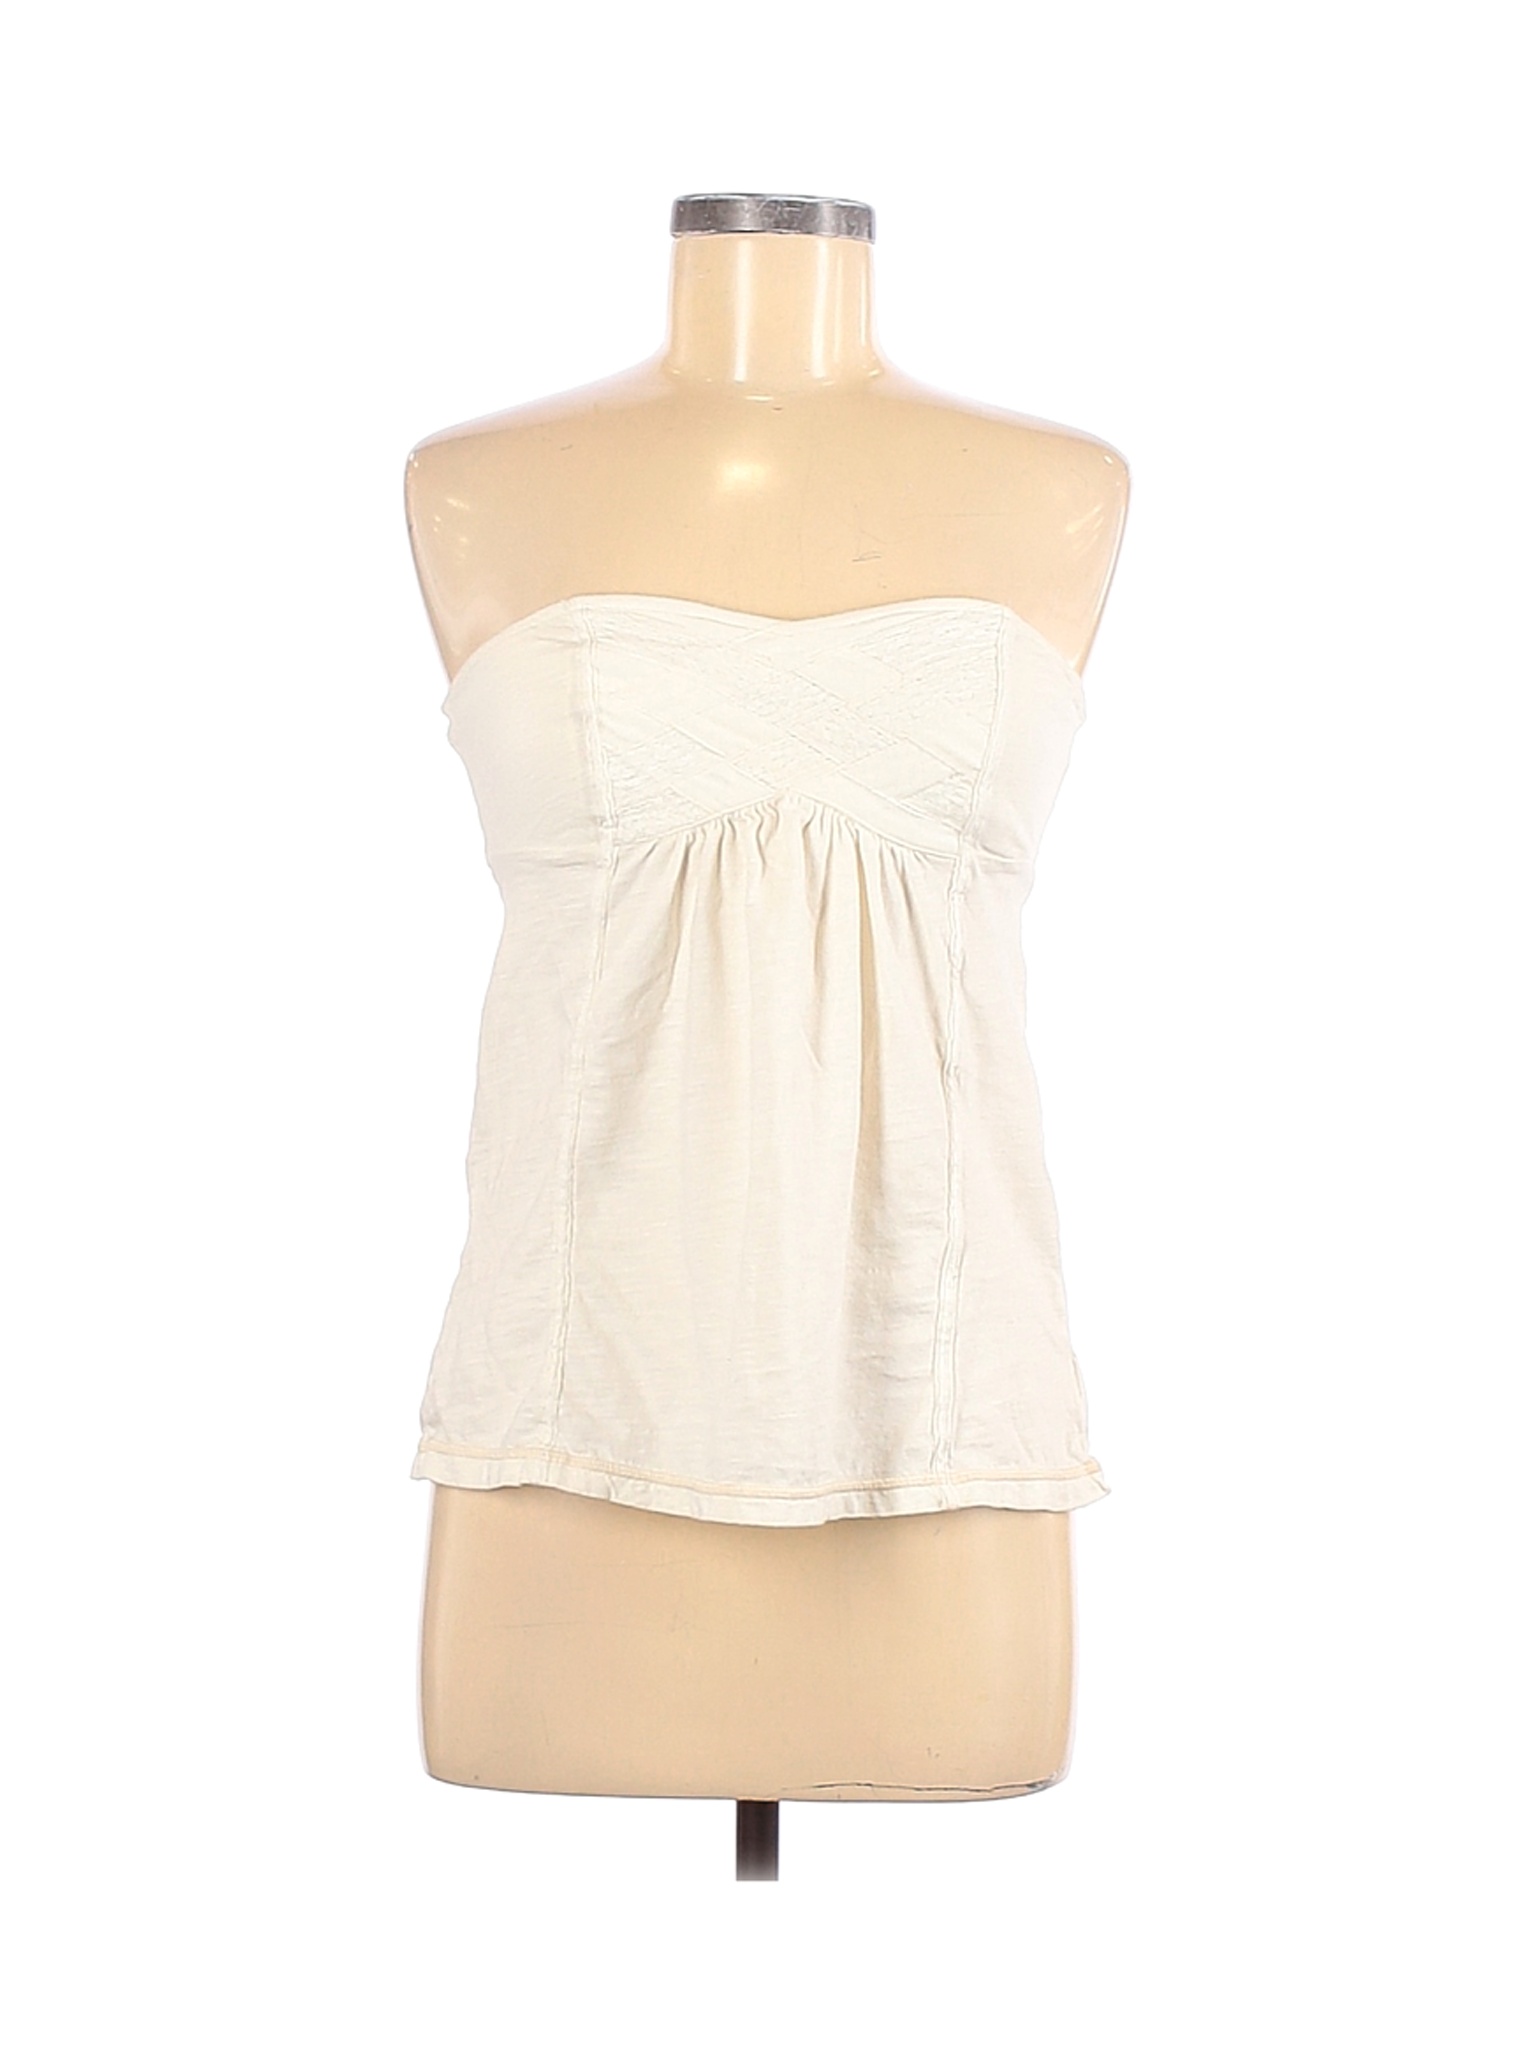 American Eagle Outfitters Women Ivory Tube Top M | eBay